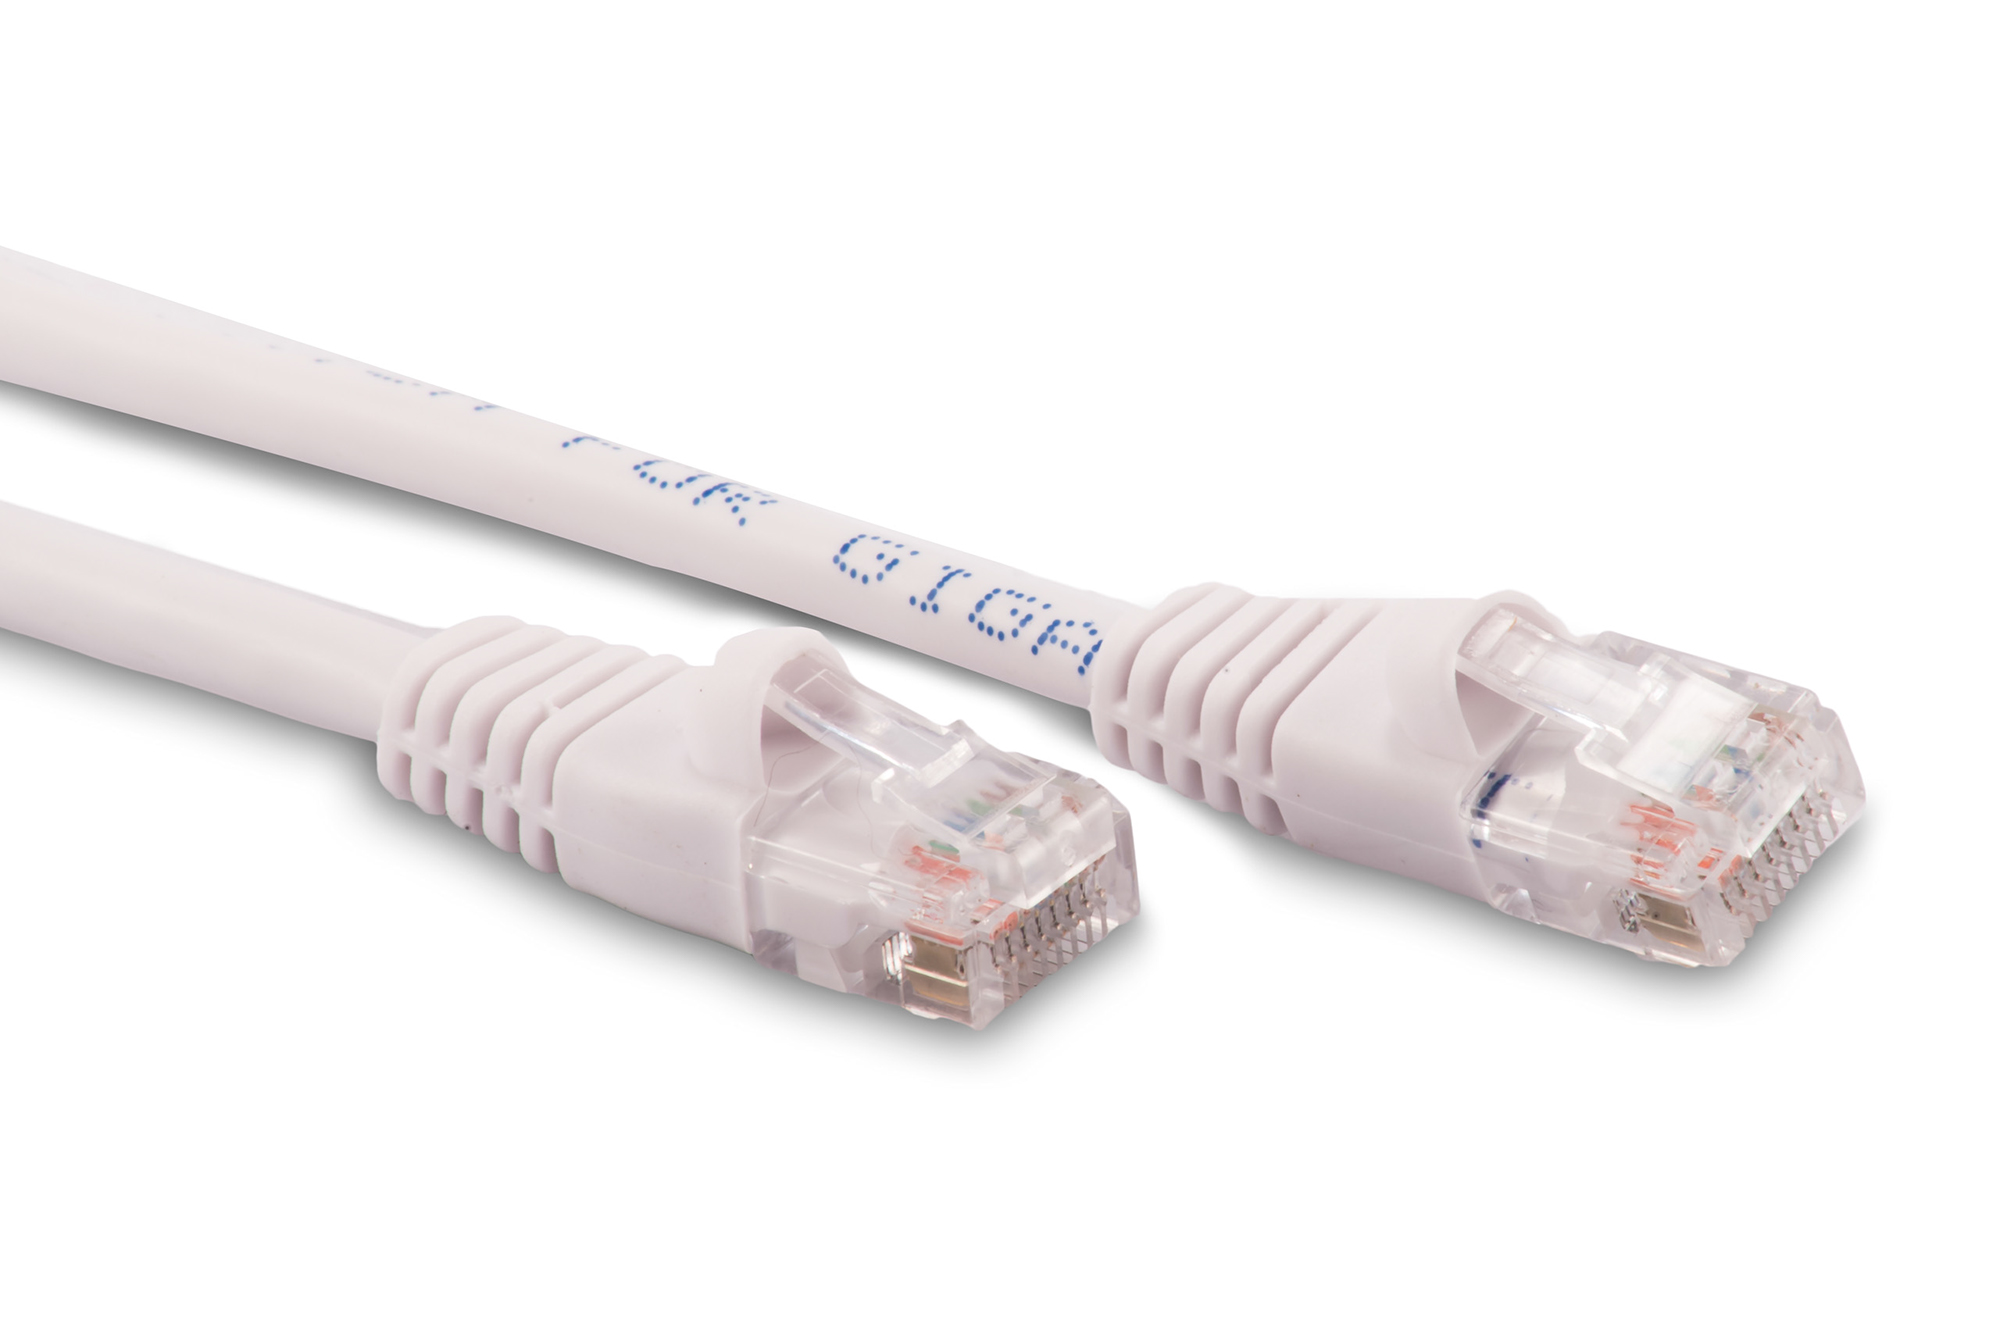 10ft Cat6 Ethernet Patch Cable - White Color - Snagless Boot